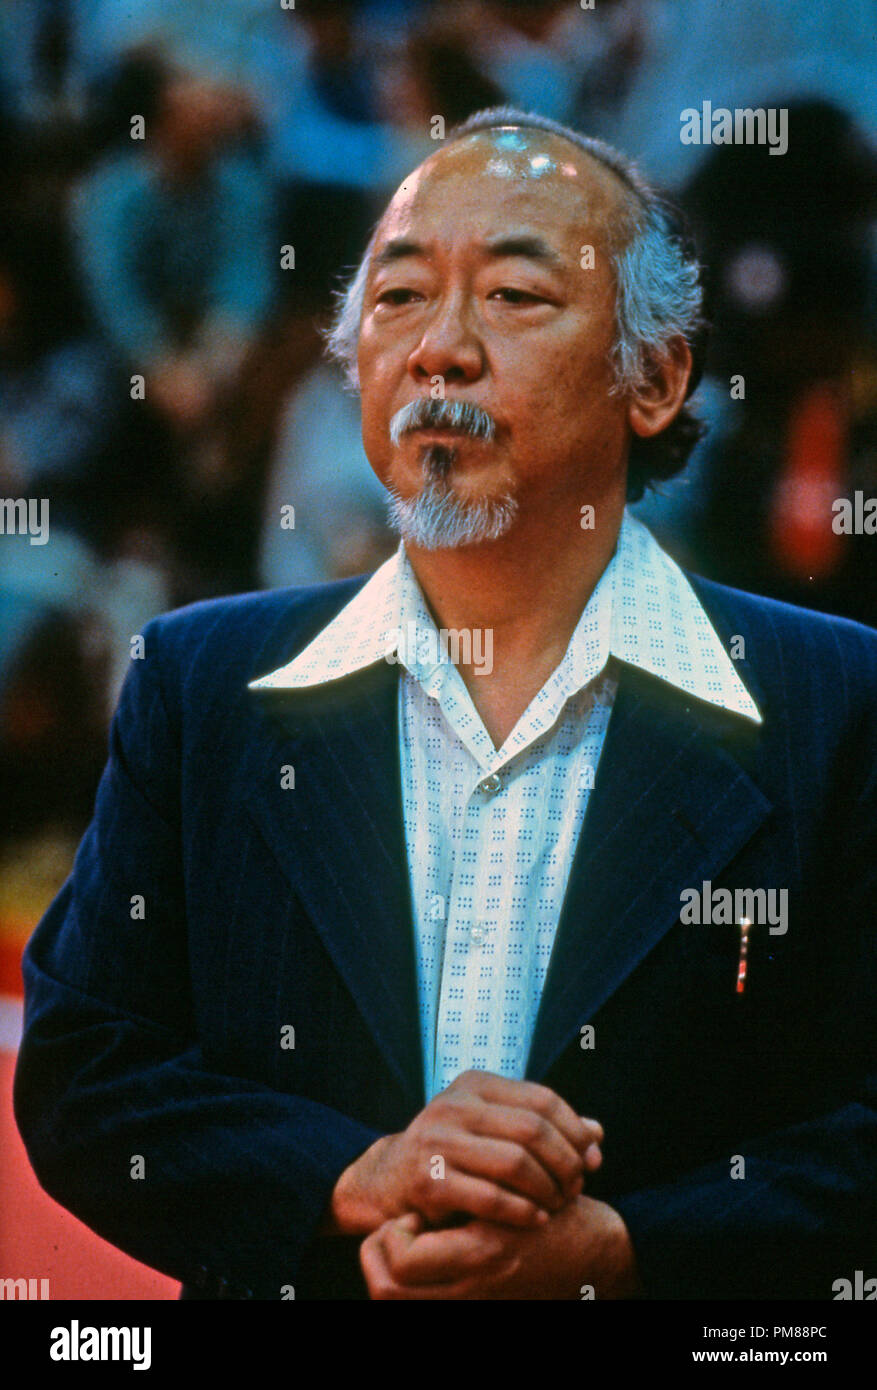 Studio Publicity Still from 'The Karate Kid' Pat Morita  © 1984 Columbia      All Rights Reserved   File Reference # 31706085THA  For Editorial Use Only Stock Photo